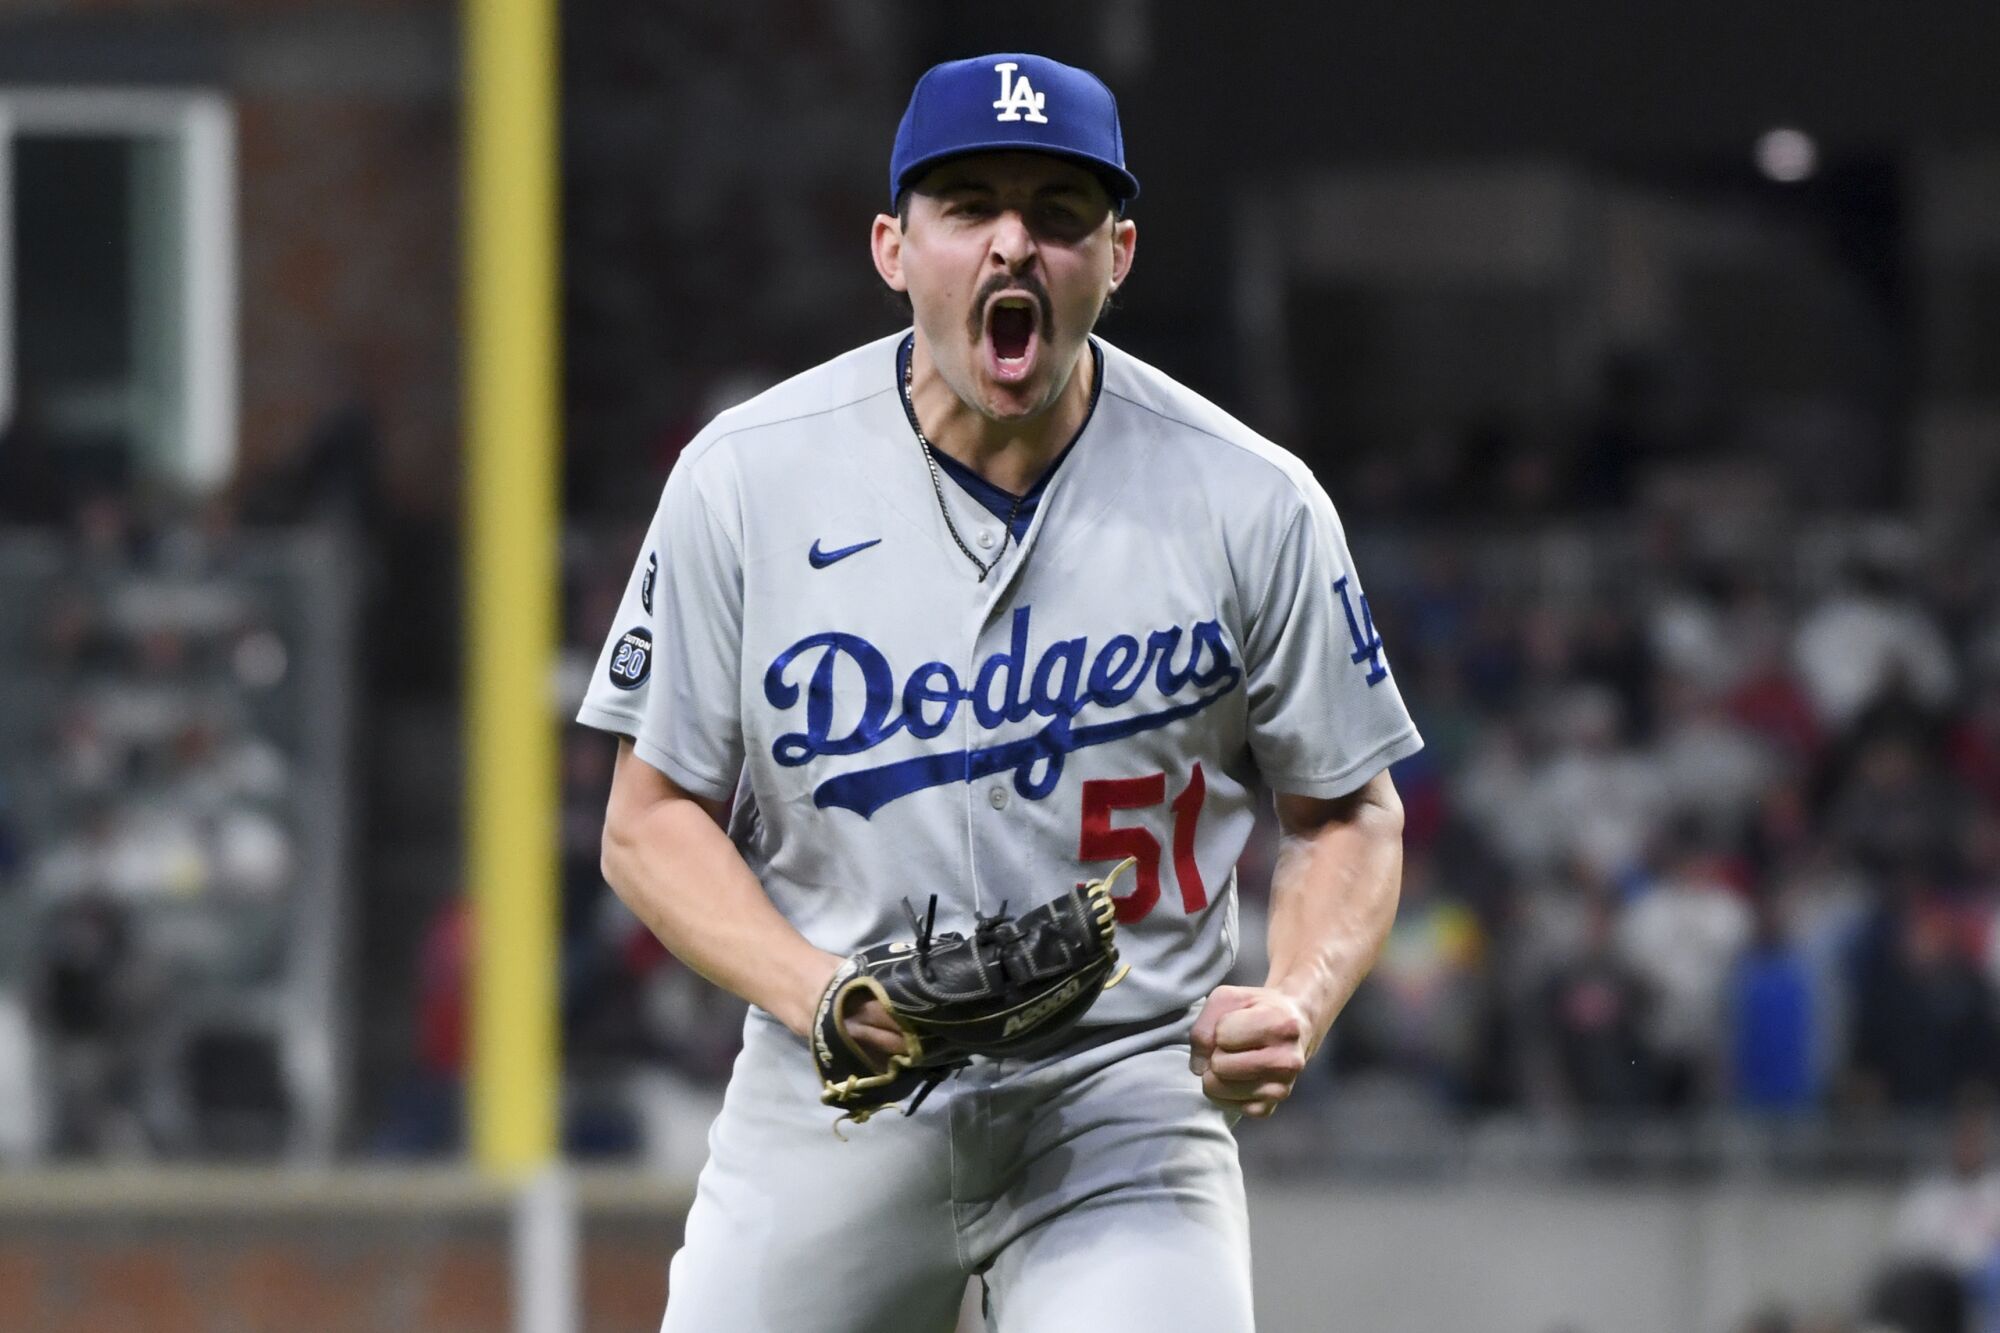 Dodgers reliever Alex Vesia lets out a shout after being sidelined in a playoff game last season.